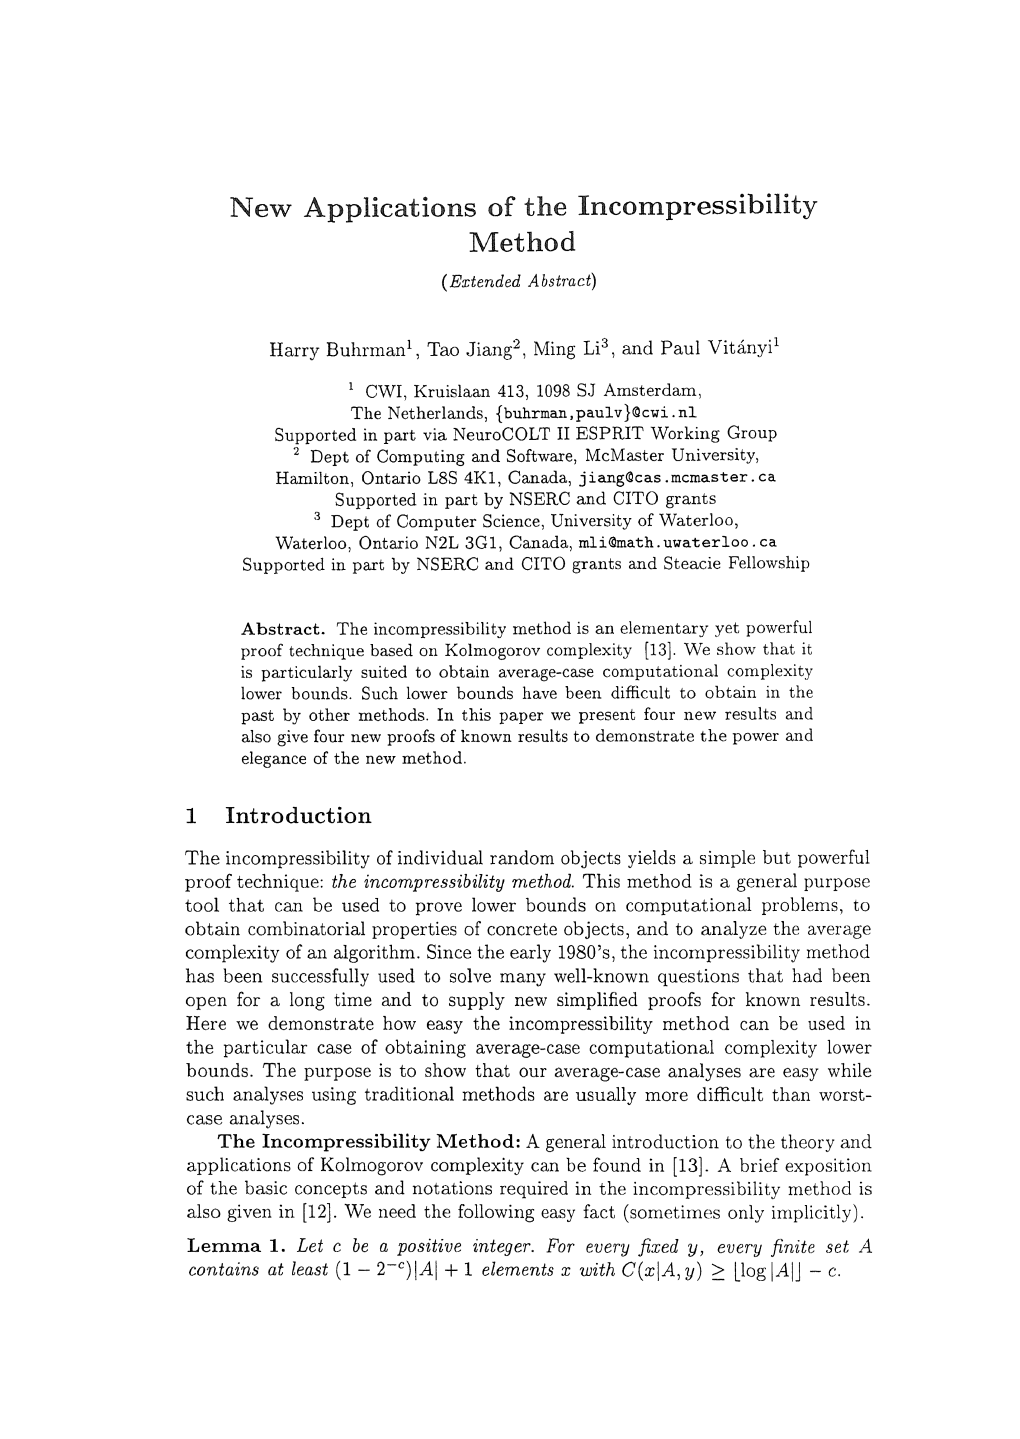 New Applications of the Incompressibility Method (Extended Abstract)